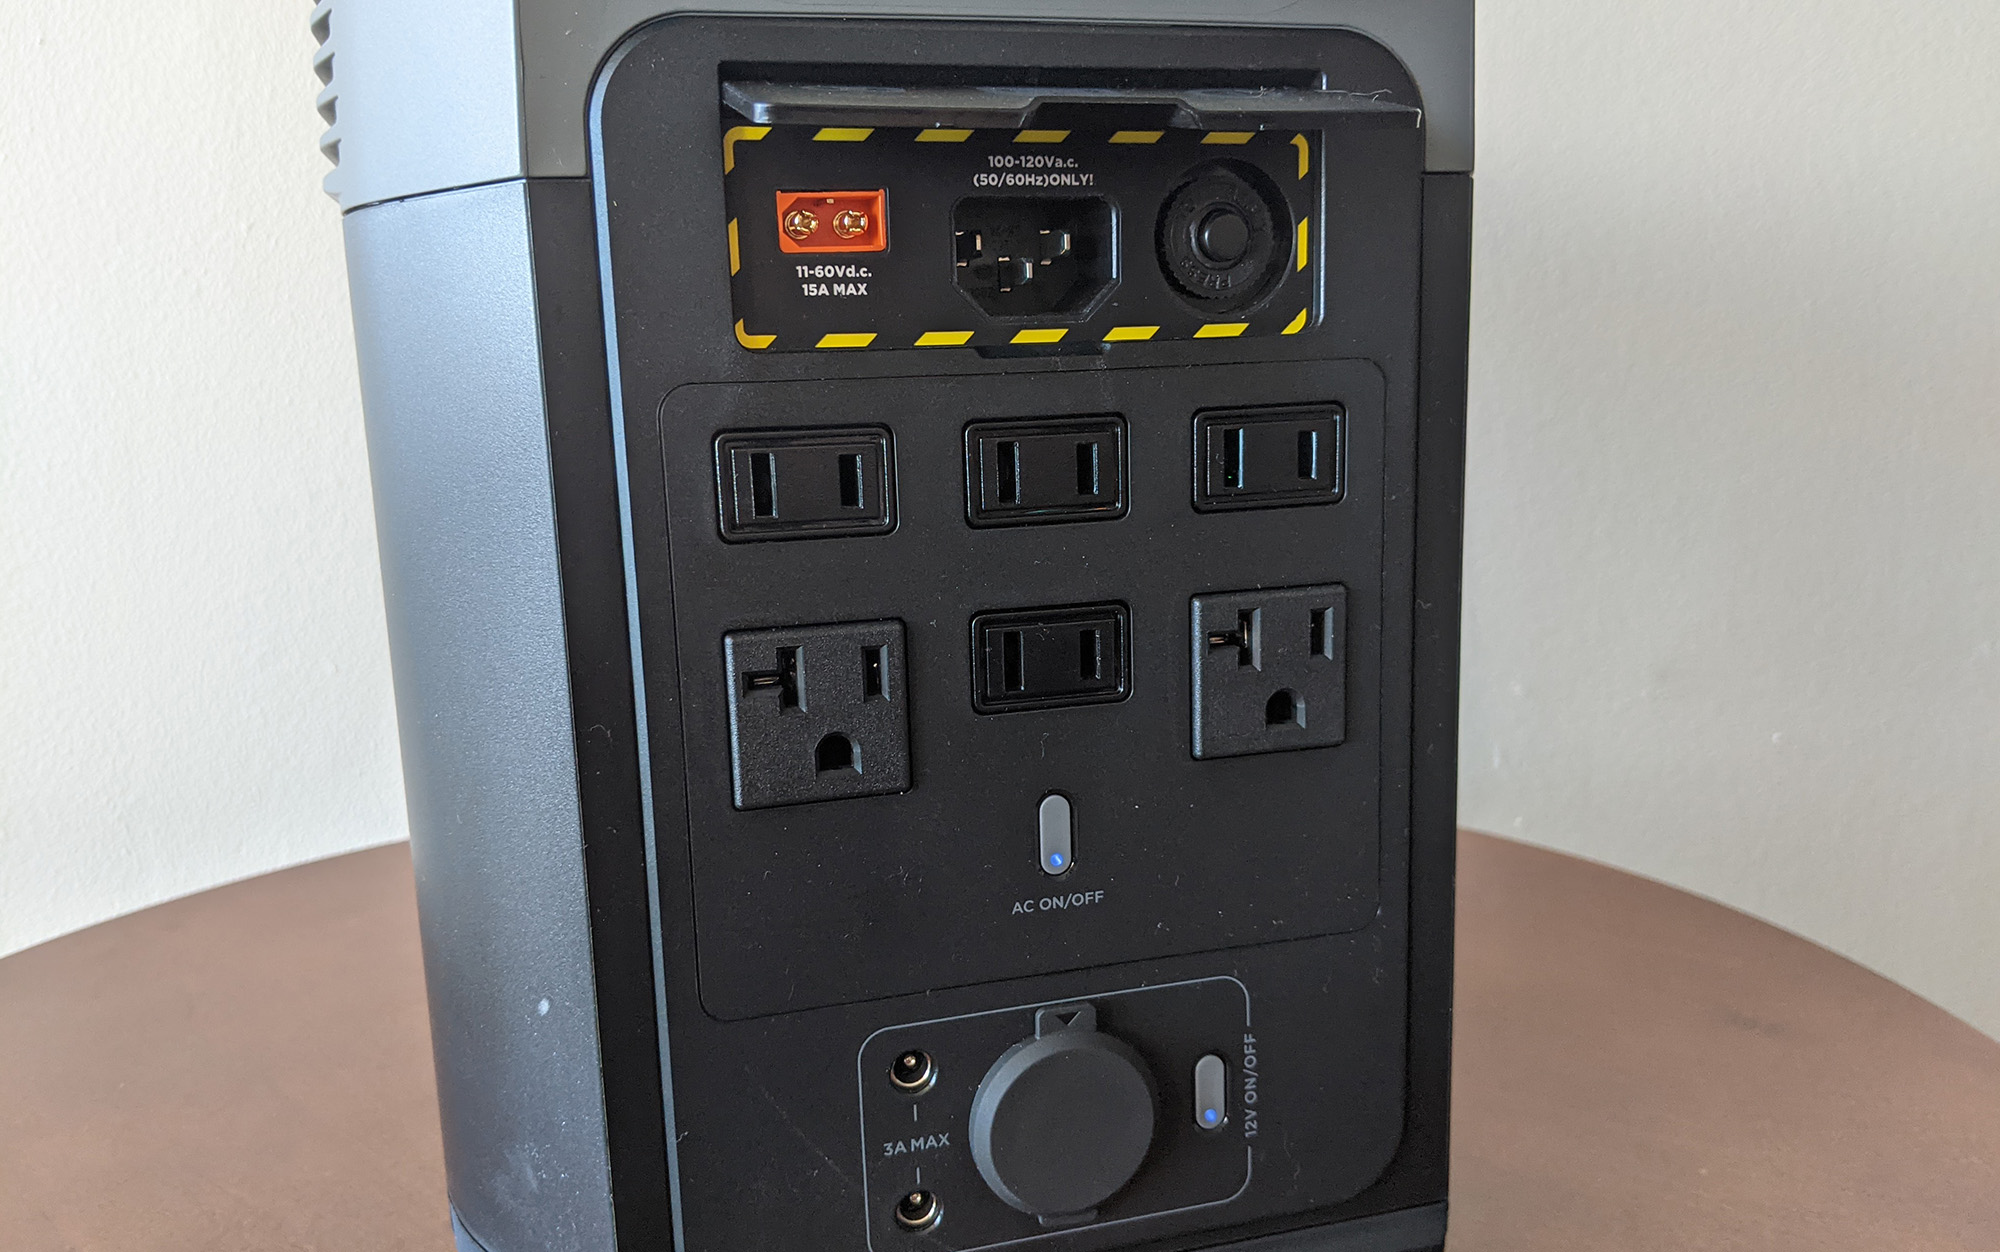 Unusually, the EcoFlow Delta 2 has its AC ports and car charger port on the back of the power station, along with the AC and solar input ports. 